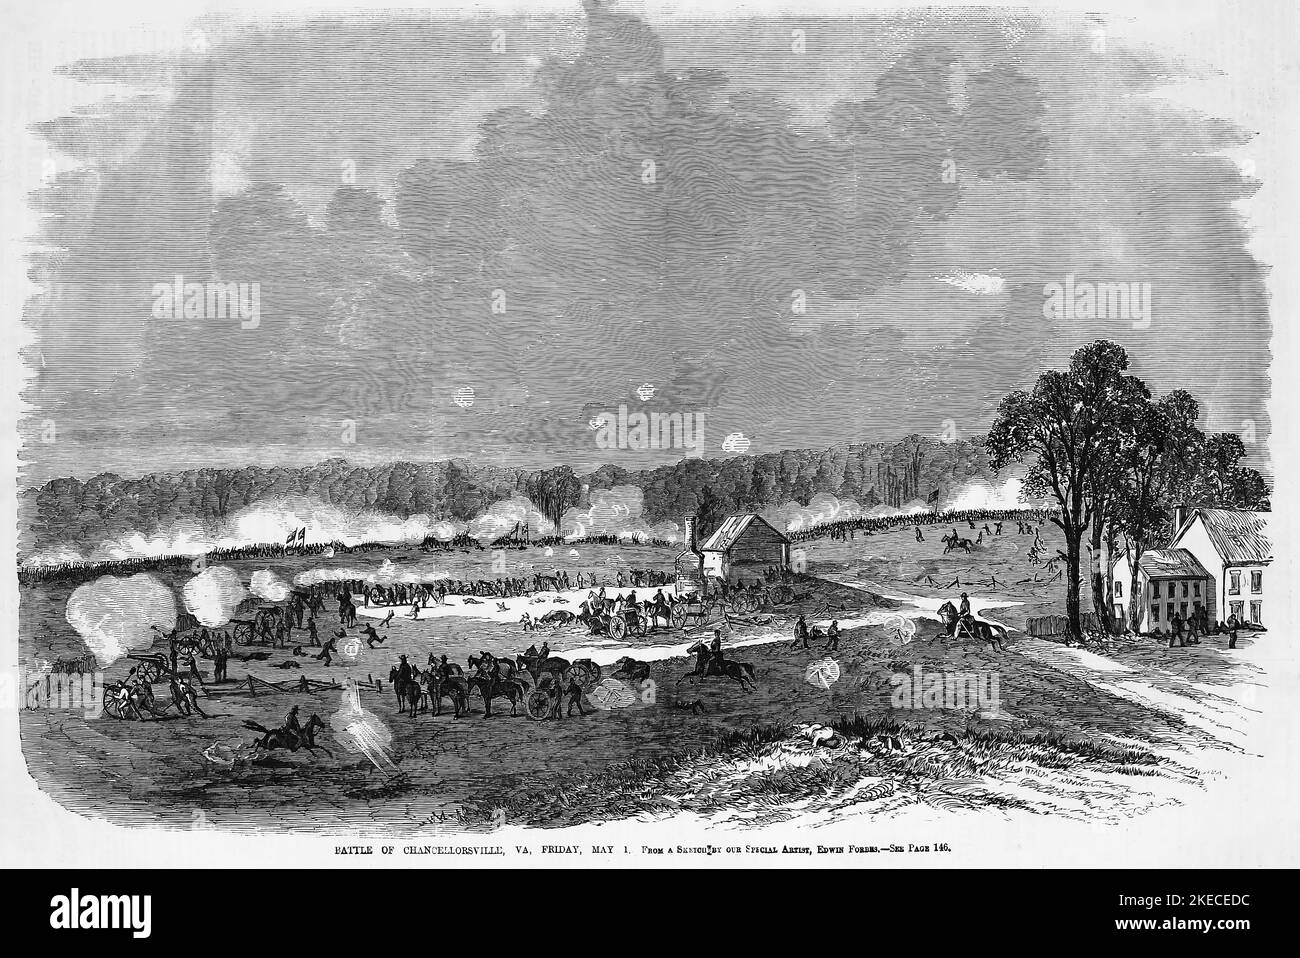 Battle of Chancellorsville, Virginia, Friday, May 1st, 1863. 19th century American Civil War illustration from Frank Leslie's Illustrated Newspaper Stock Photo